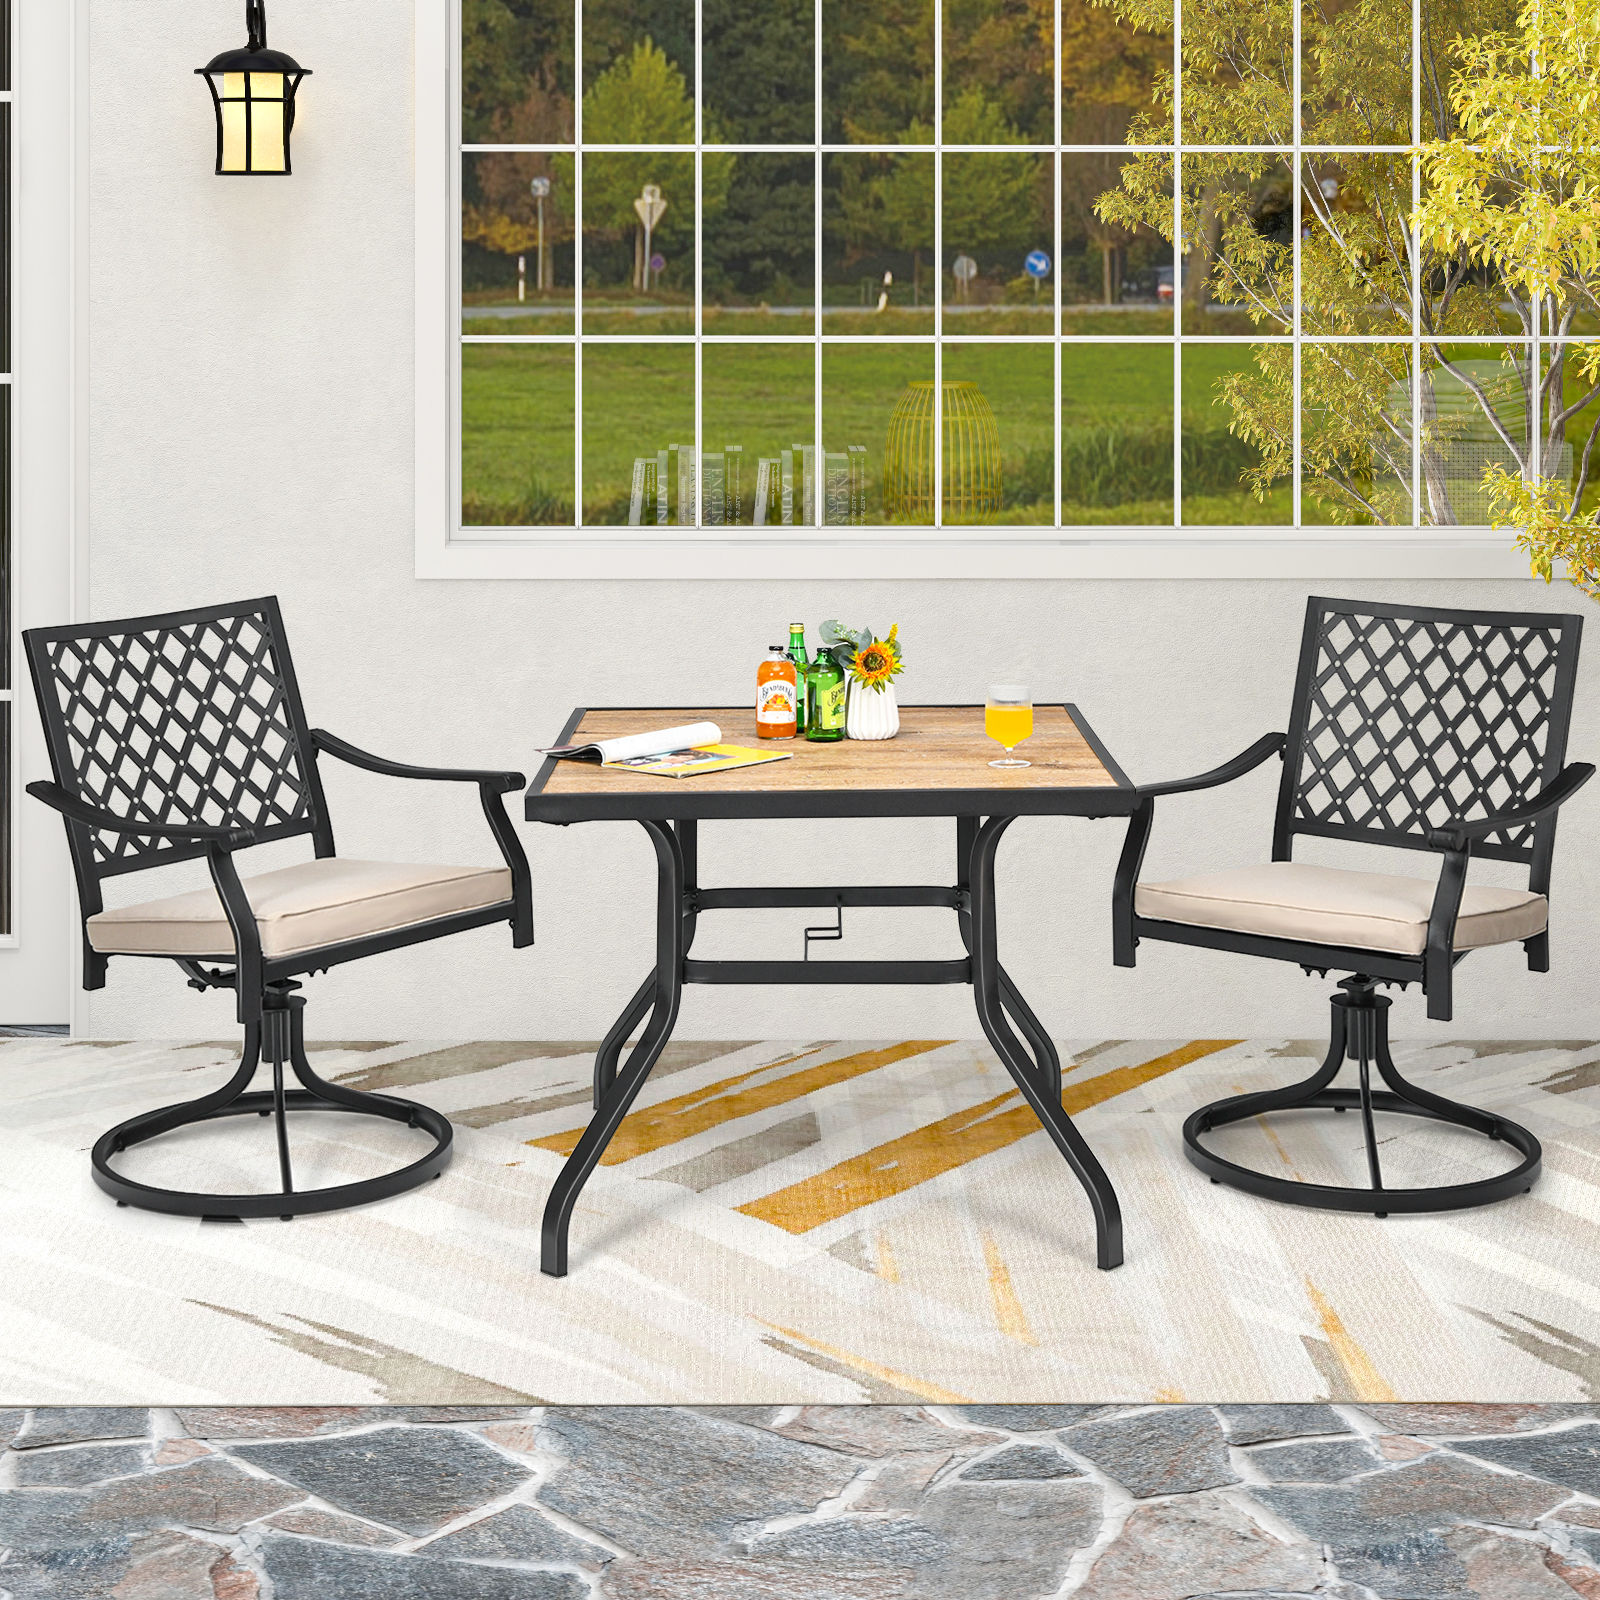 2_Pieces_Outdoor_Swivel_Chair_Patio_Bistro_Dining_Chair_Set_with_Soft_Seat_Cushion-1.jpg